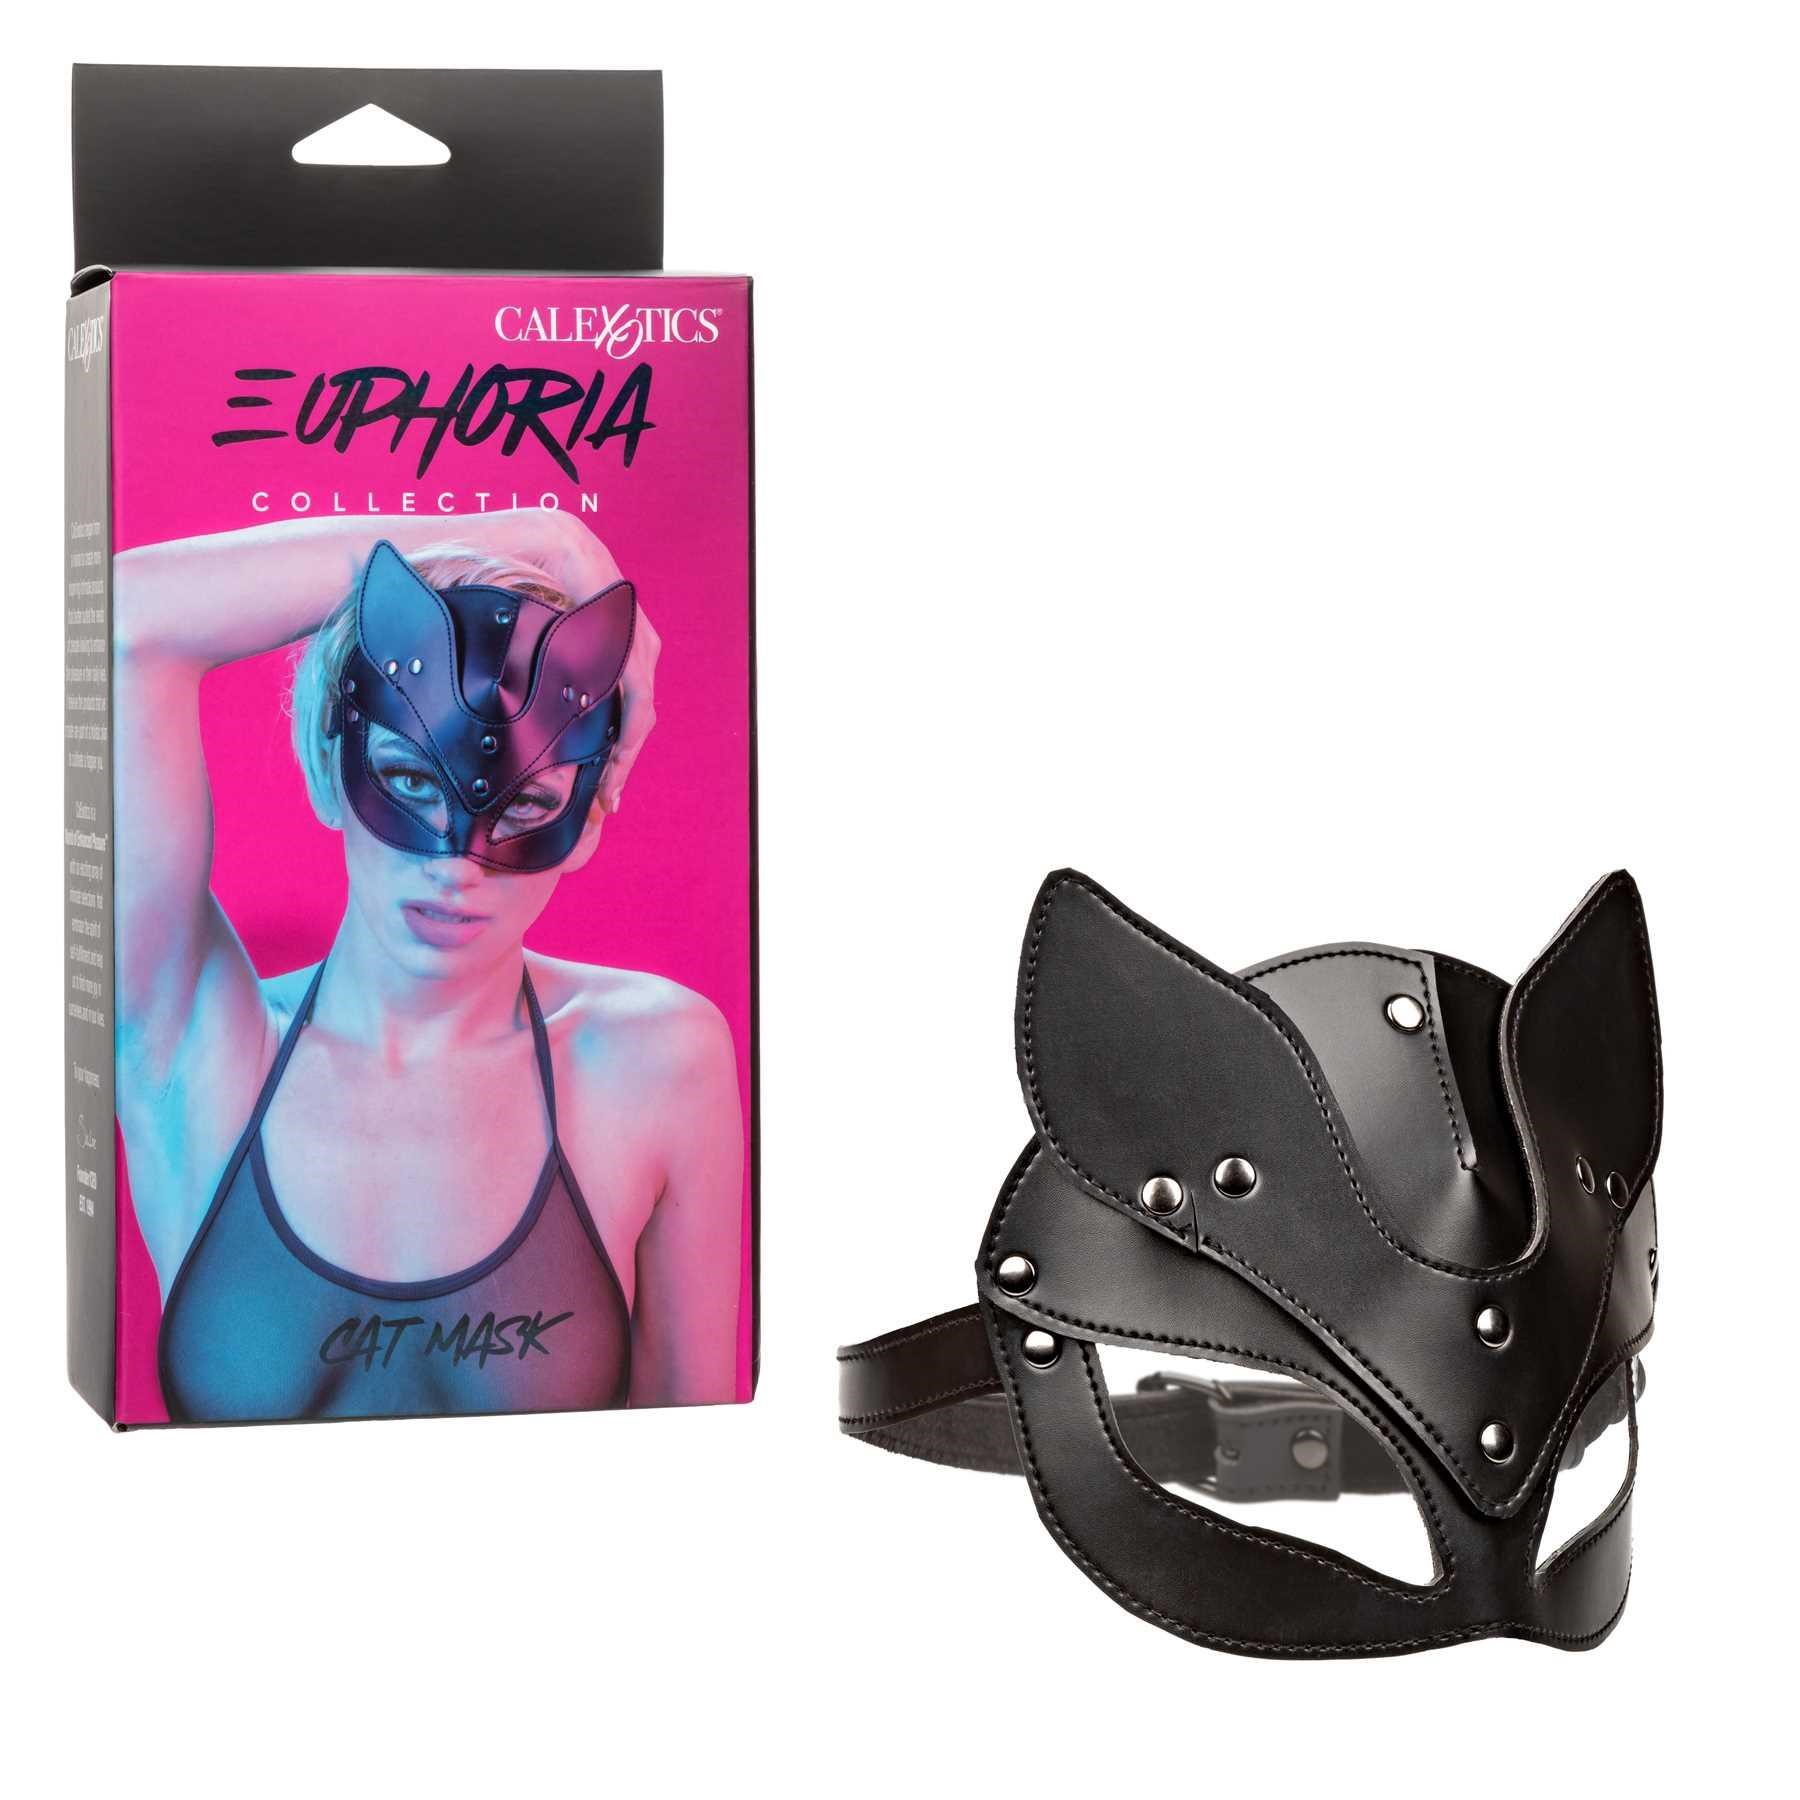 EUPHORIA COLLECTION CAT MASK box and mask